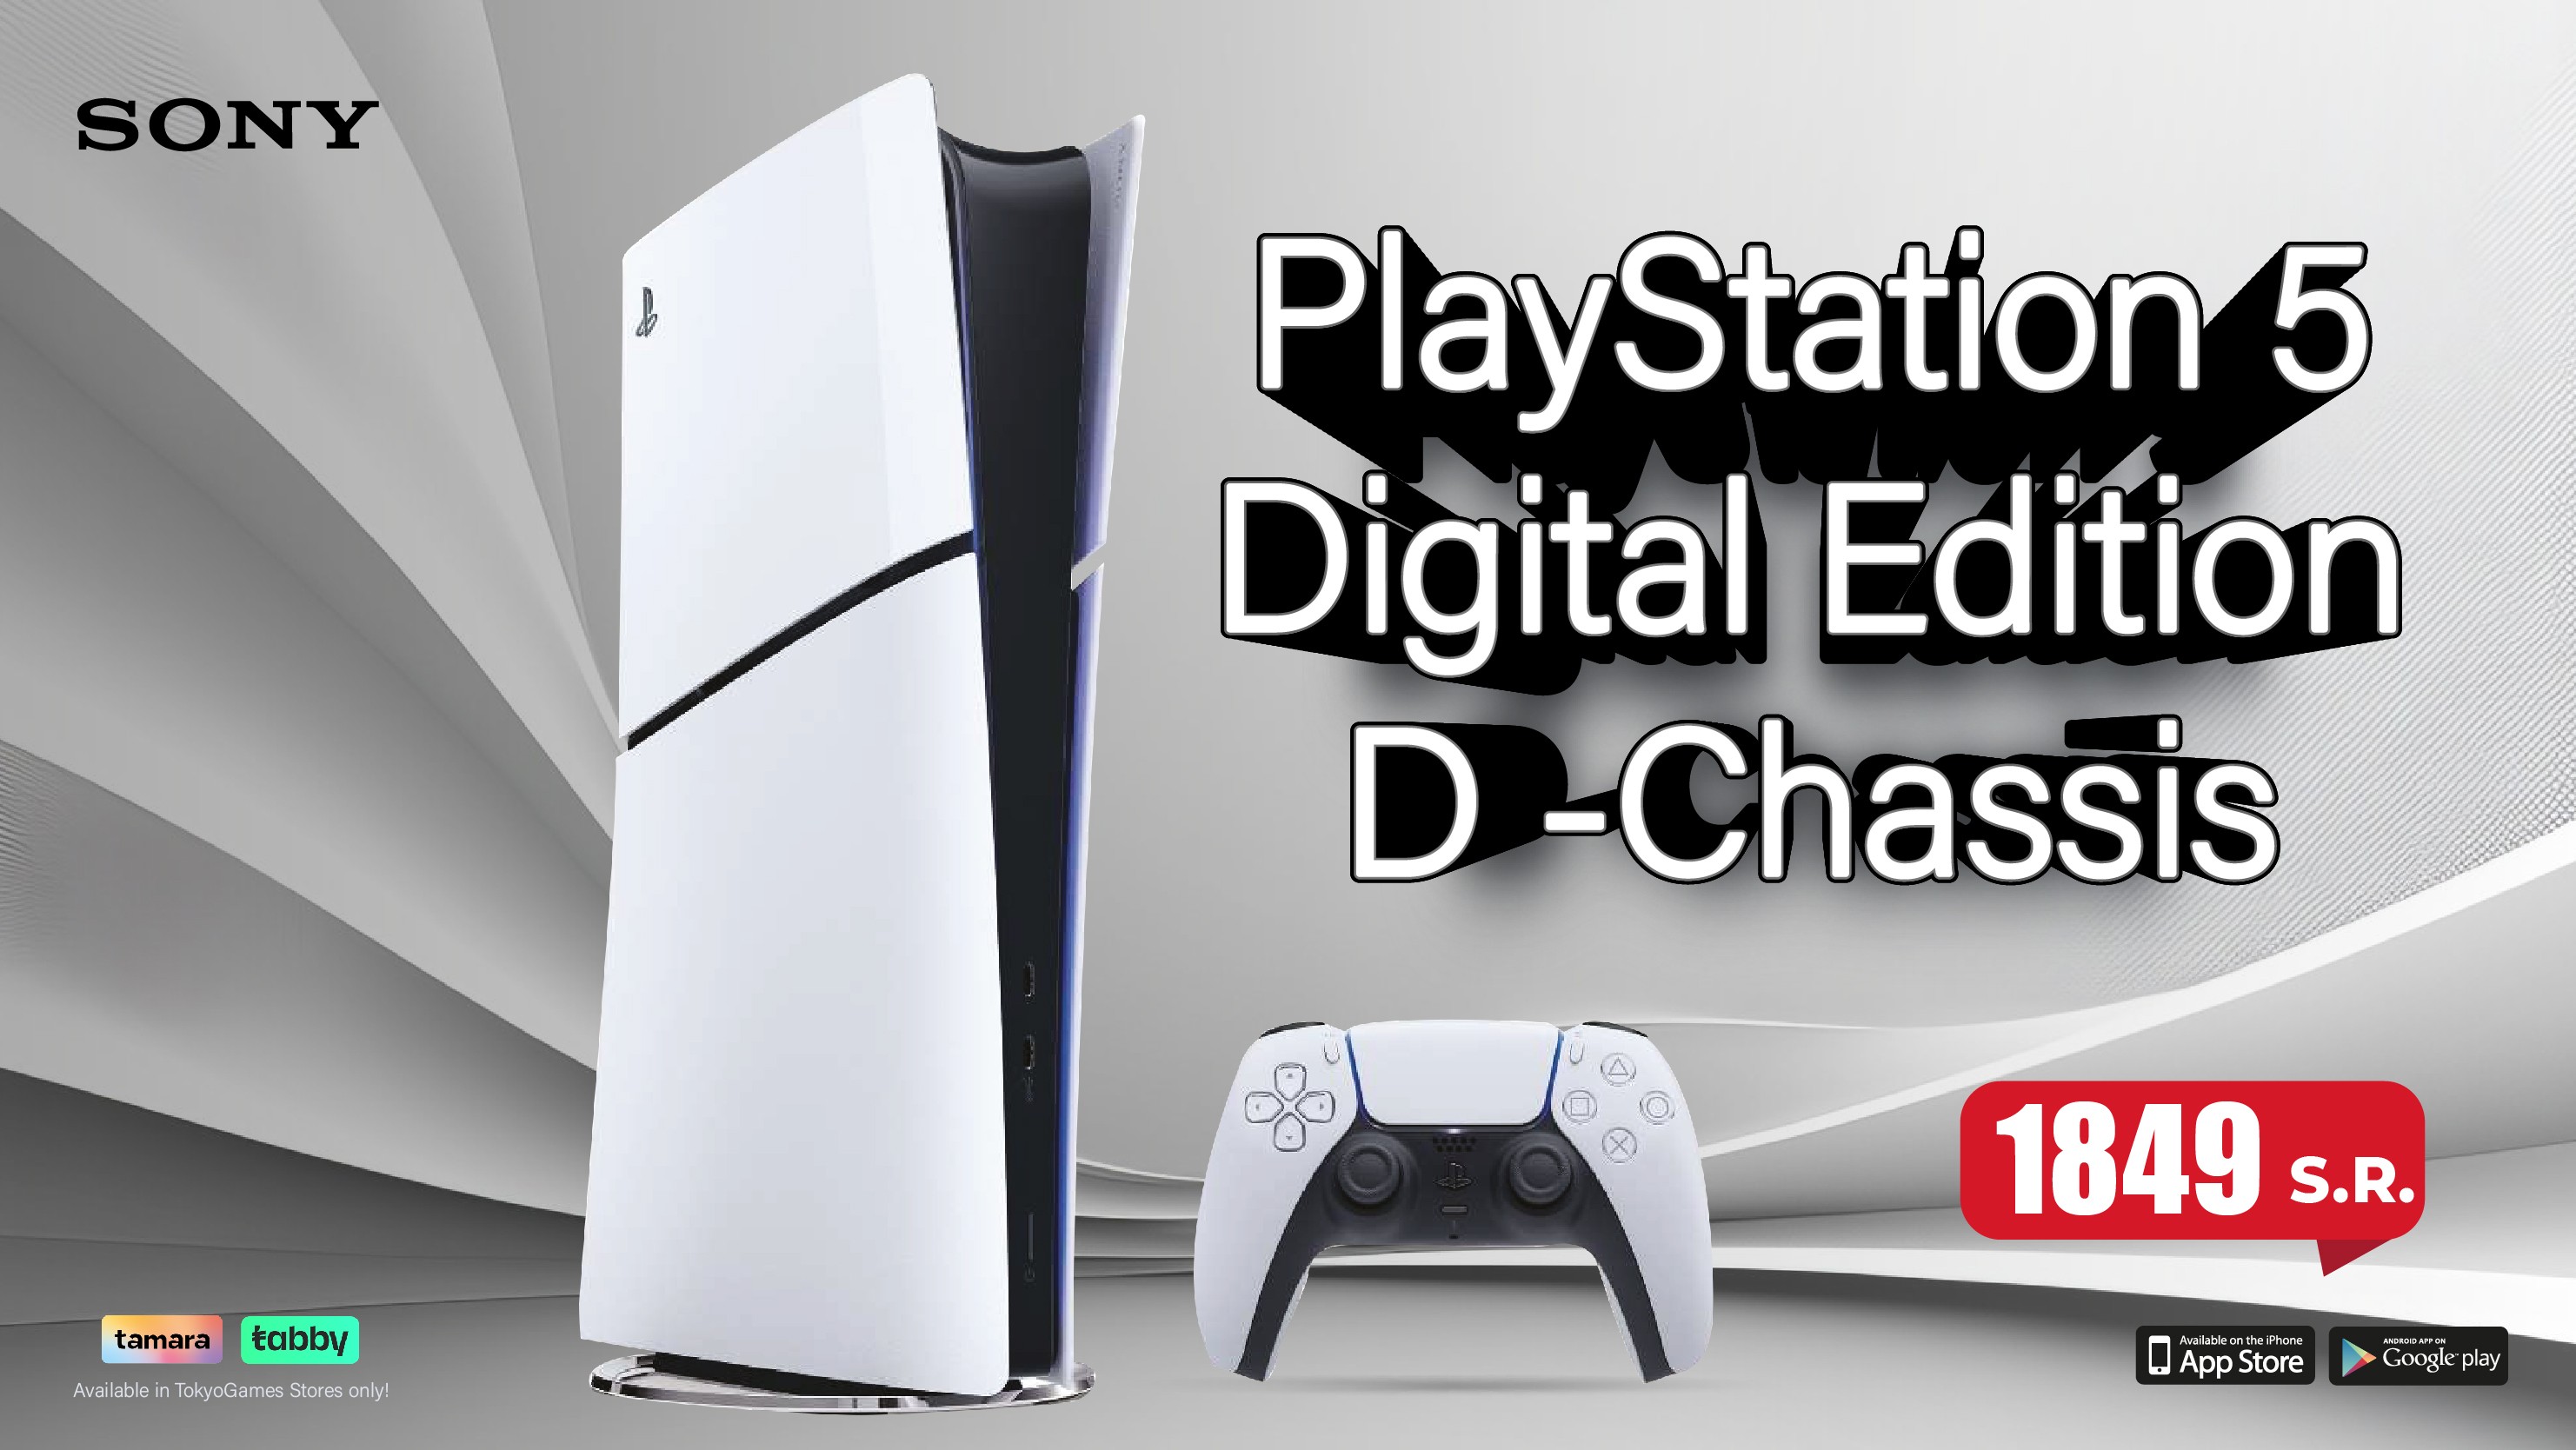 Sony PlayStation 5 Digital Edition D-Chassis